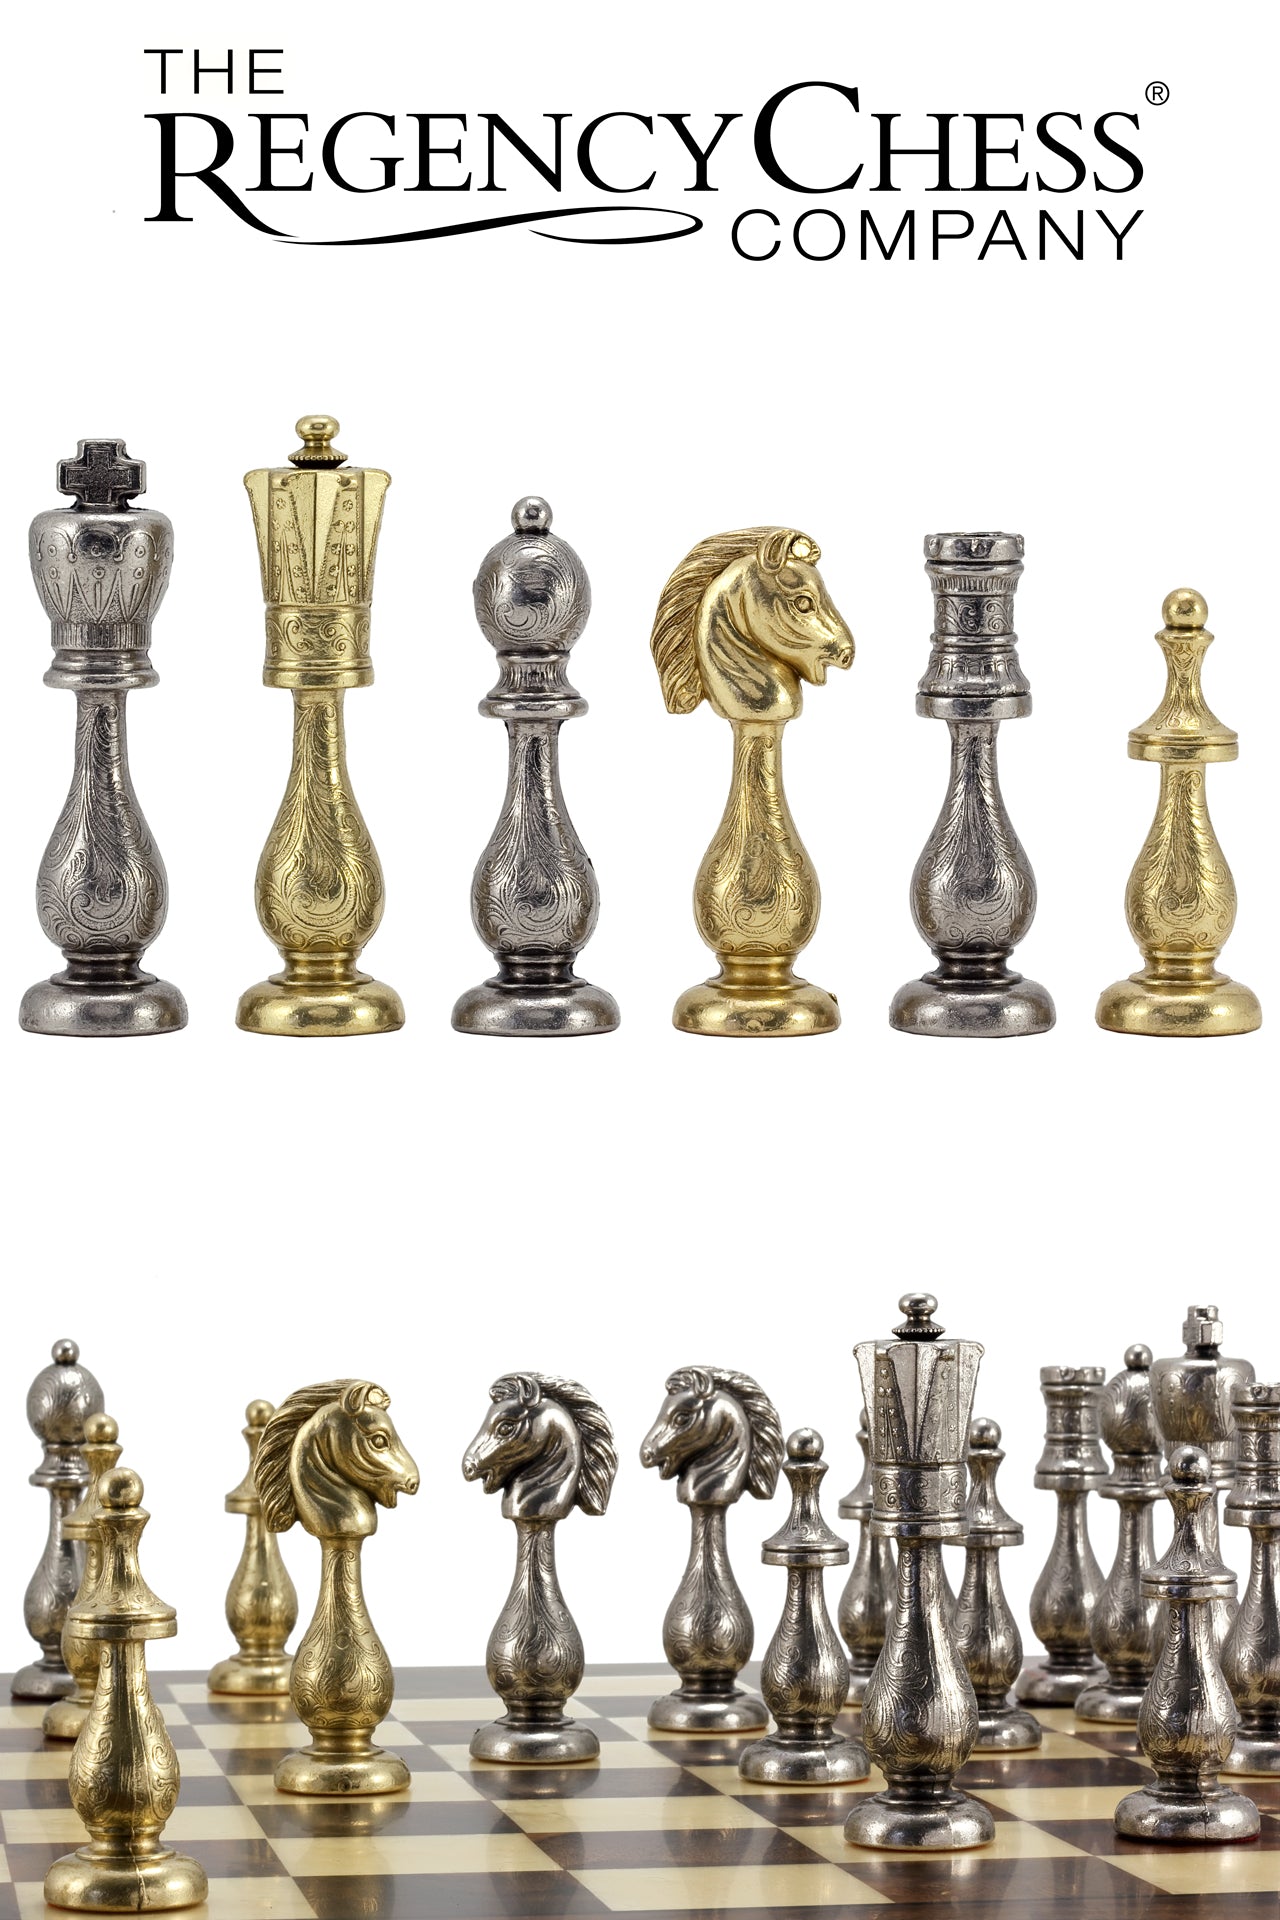 Maghreb Brass and Nickel Chess Pieces 4 Inches